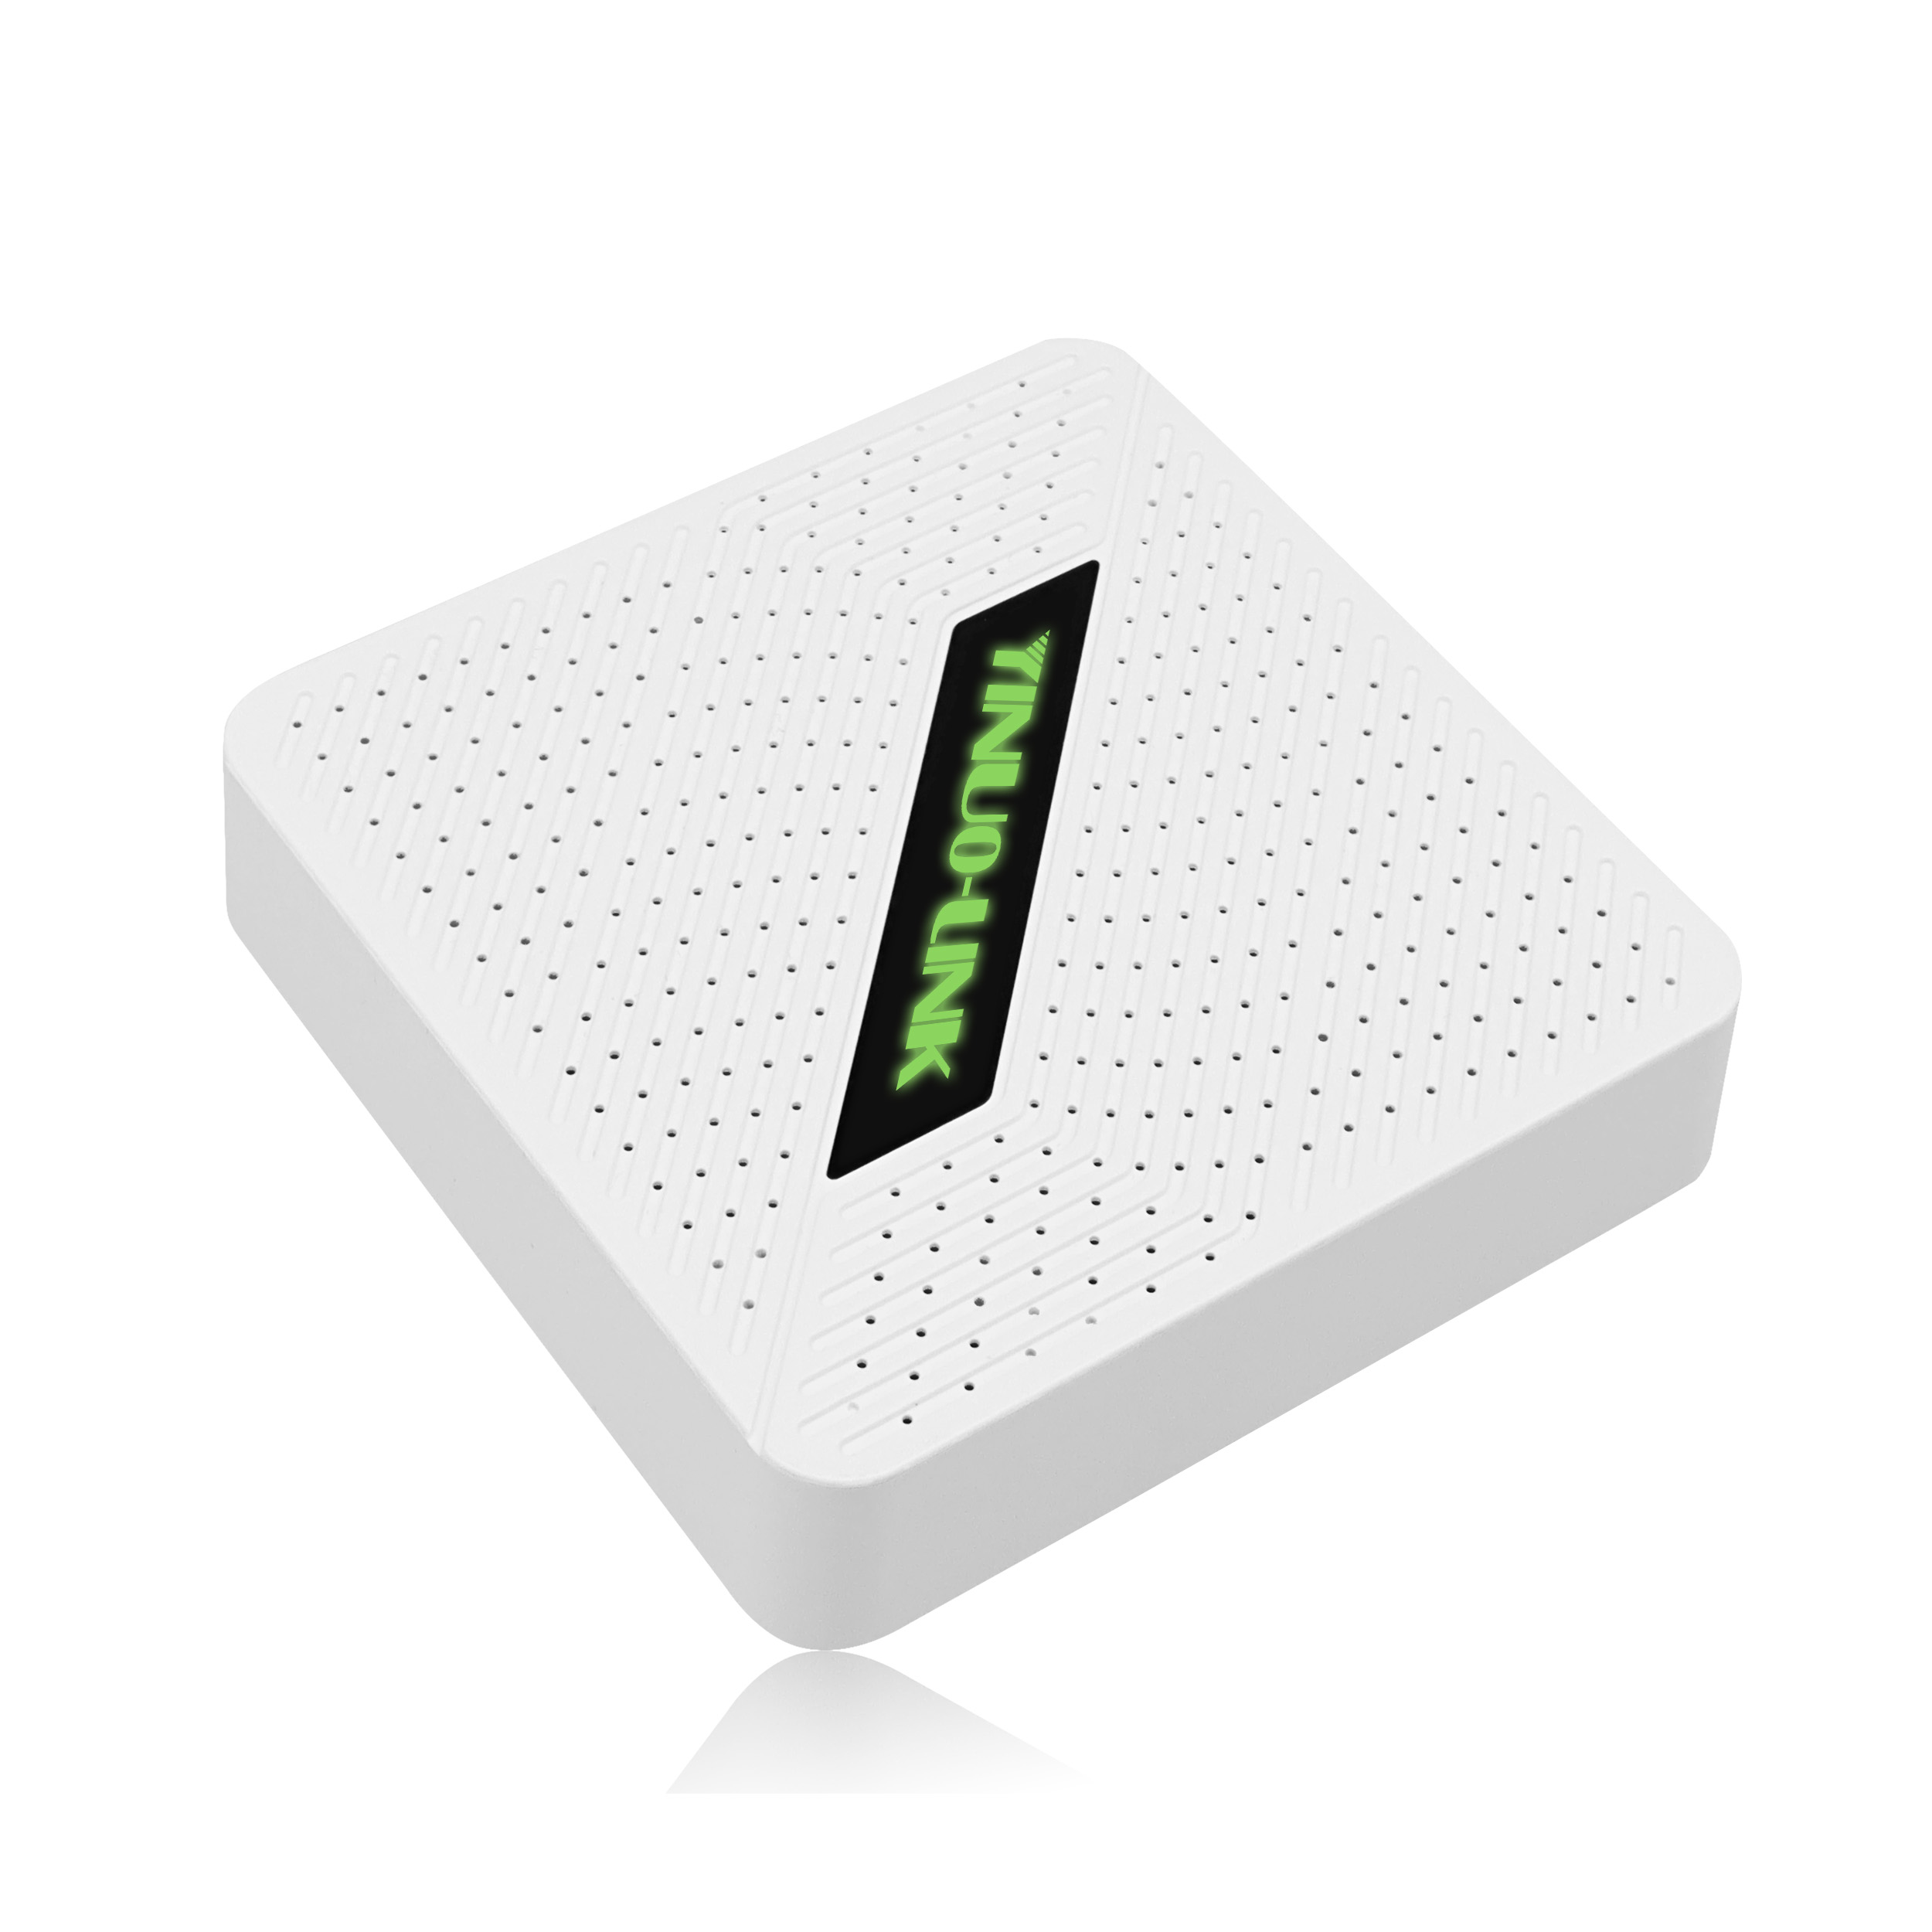 YINUO-LINK: Revolutionizing Connectivity On the Go with the Y2 AX1800 Portable Wireless Router